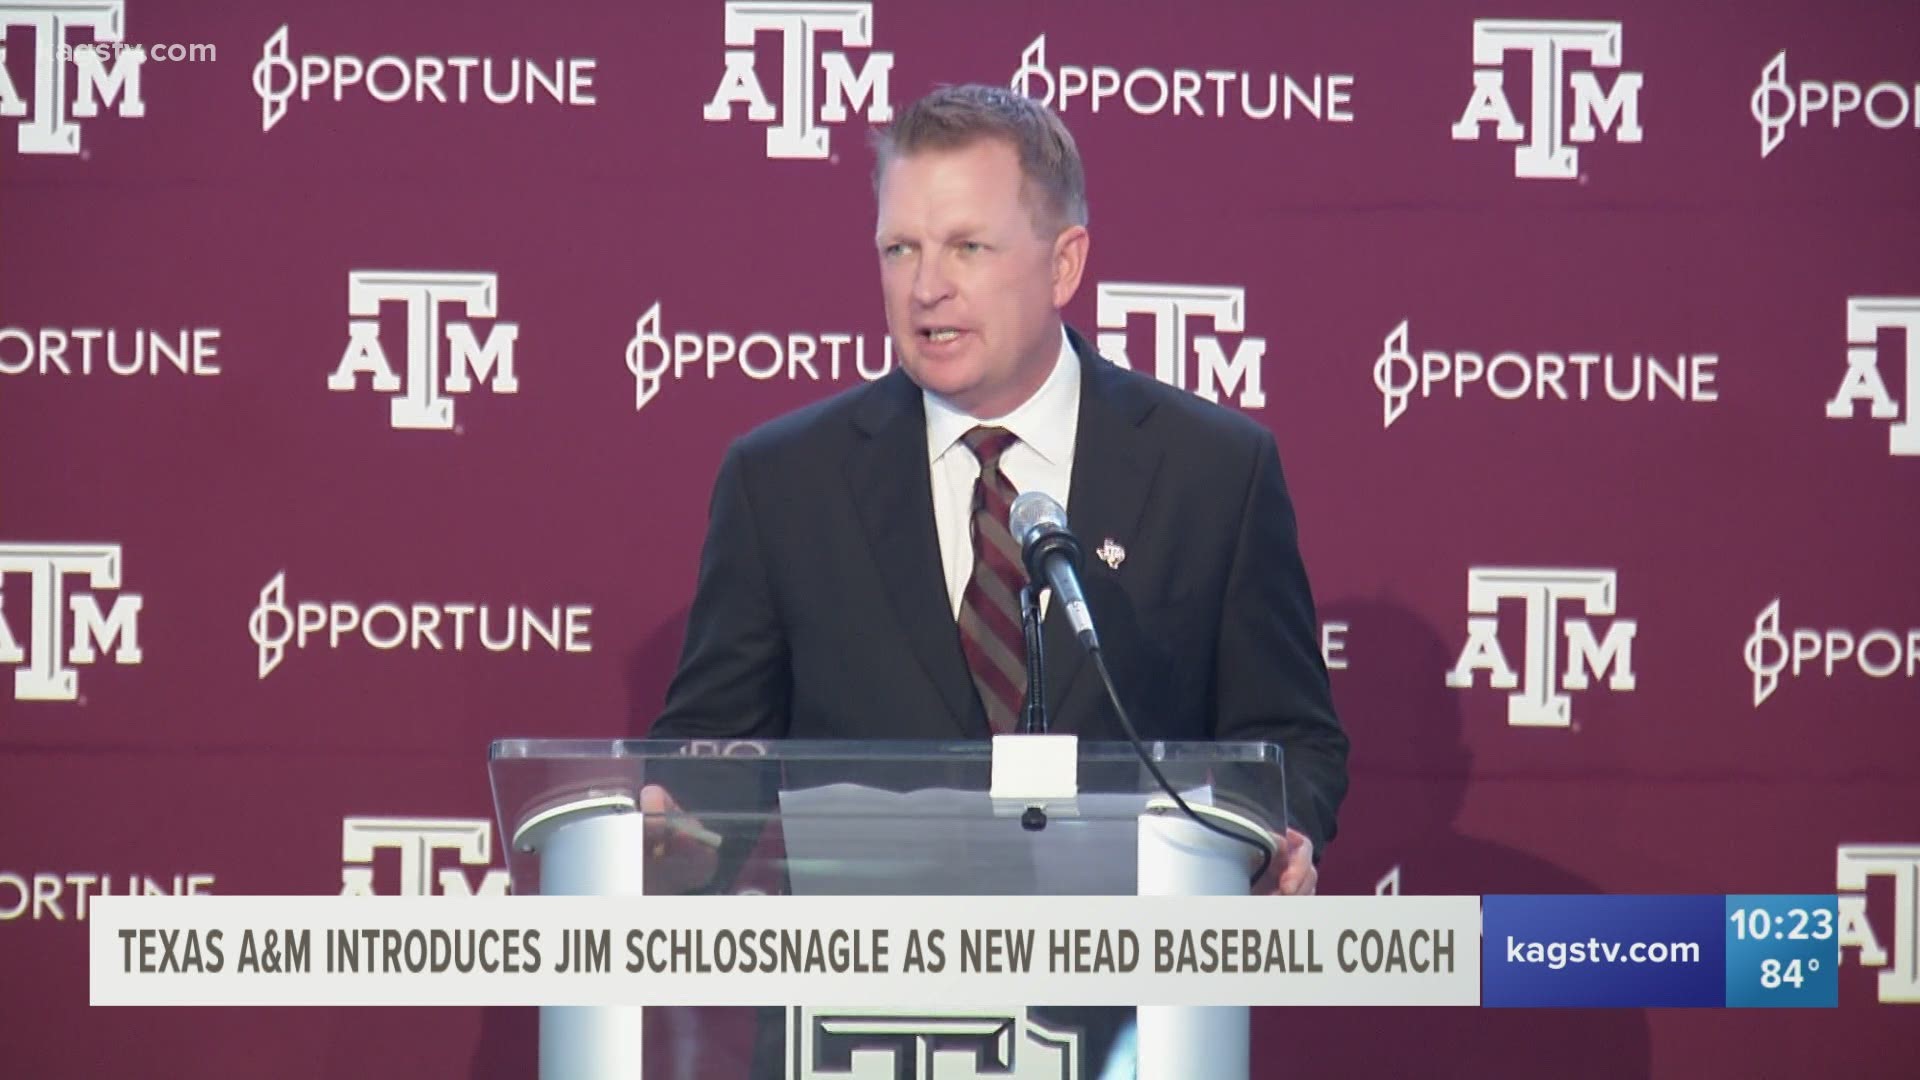 Jim Schlossnagle is the 4th A&M coach since 1959